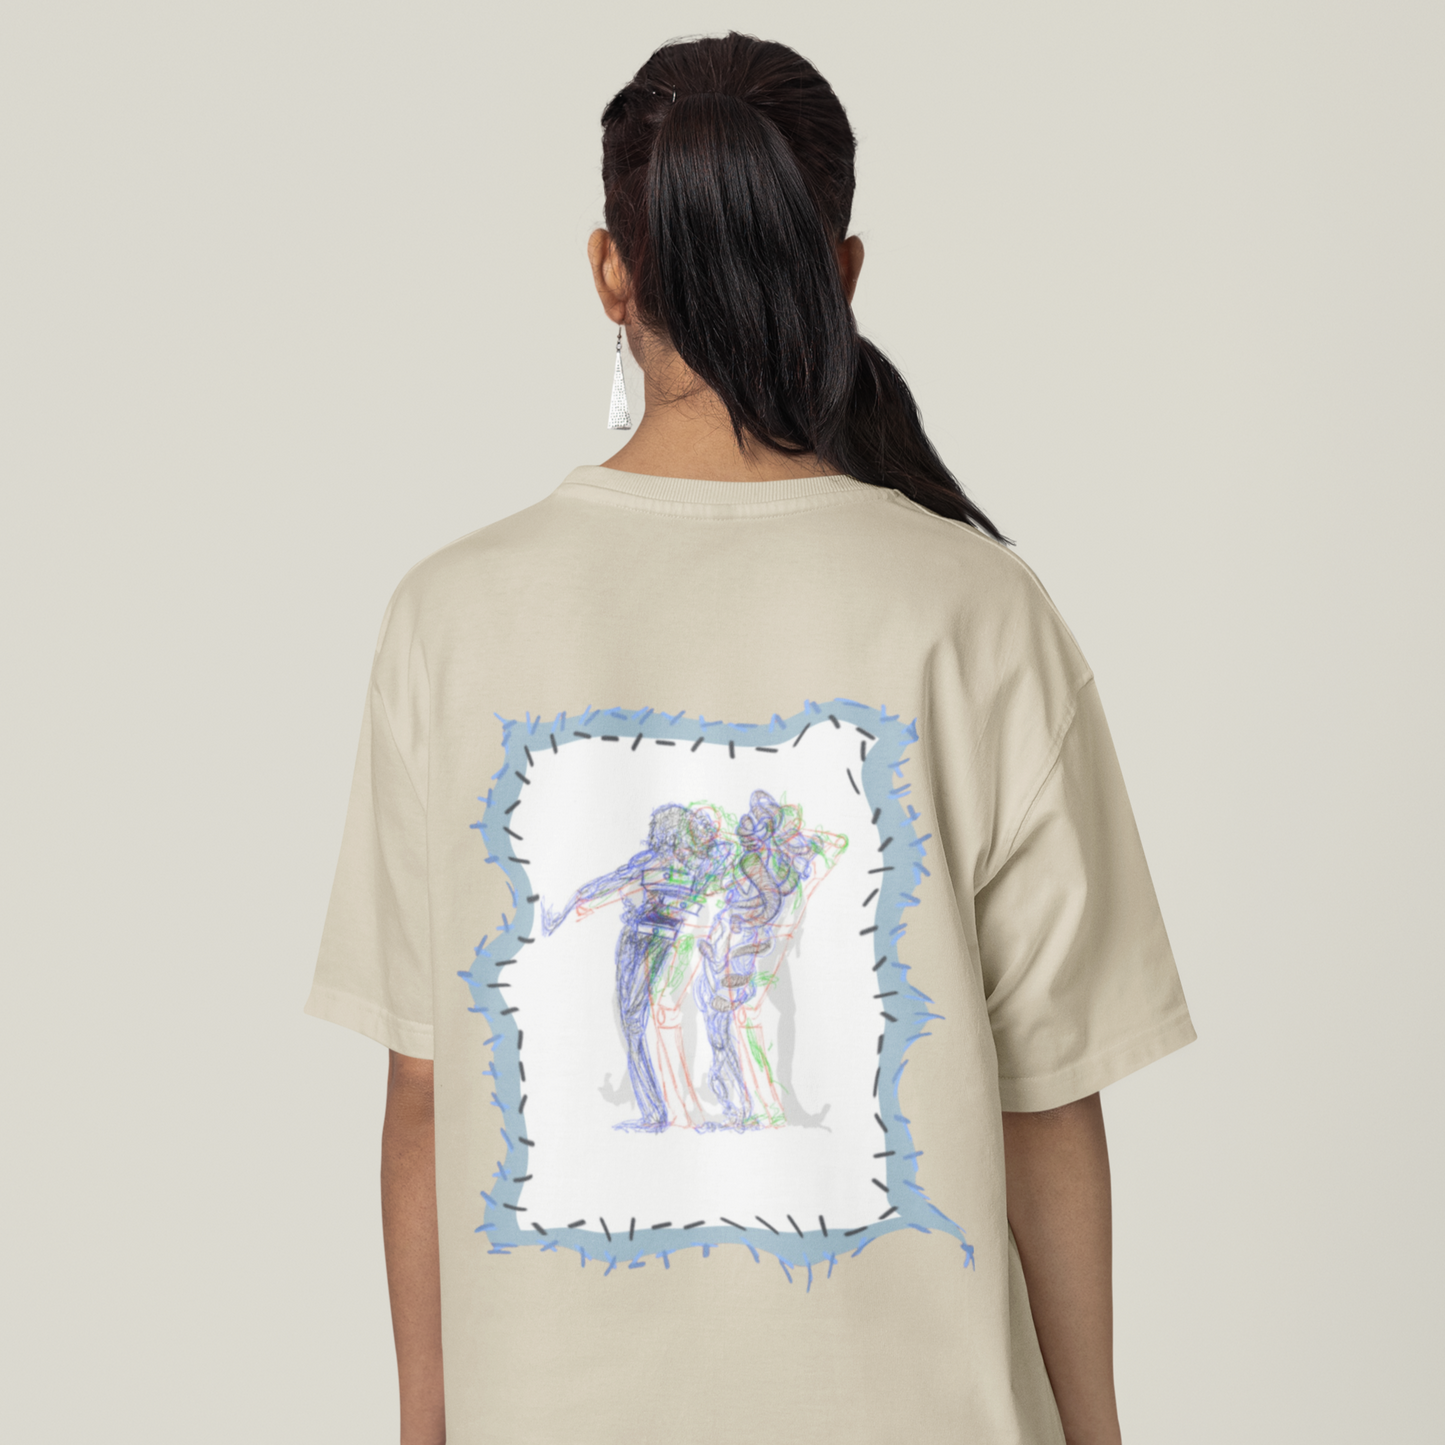 Tranquil Tunica - Original T-Shirt Unisex Front and Back Print